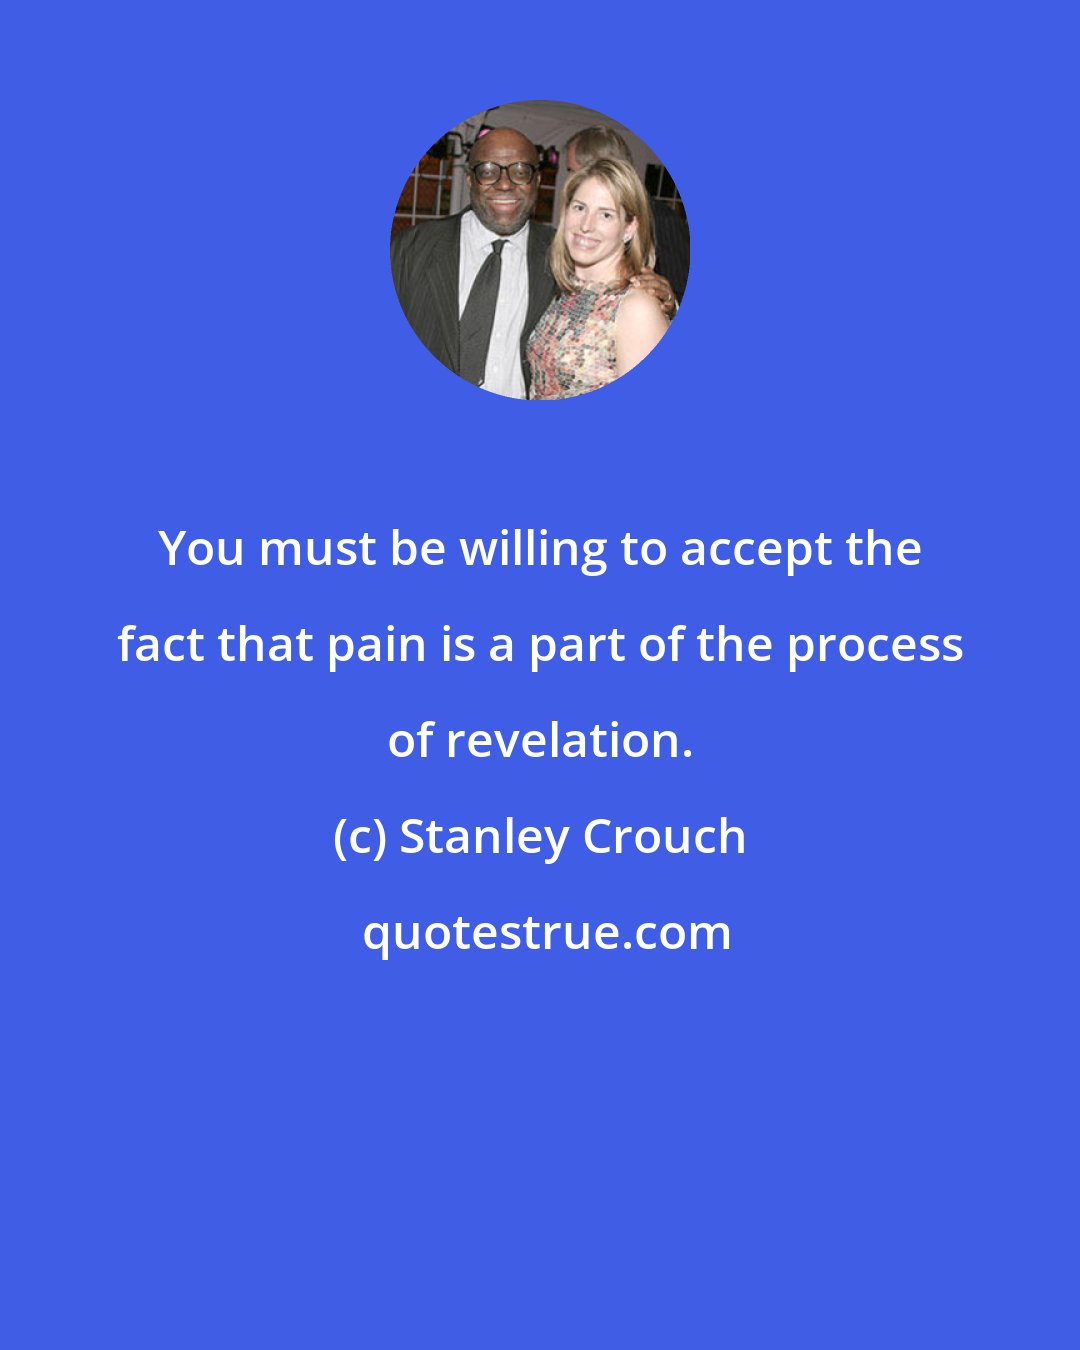 Stanley Crouch: You must be willing to accept the fact that pain is a part of the process of revelation.